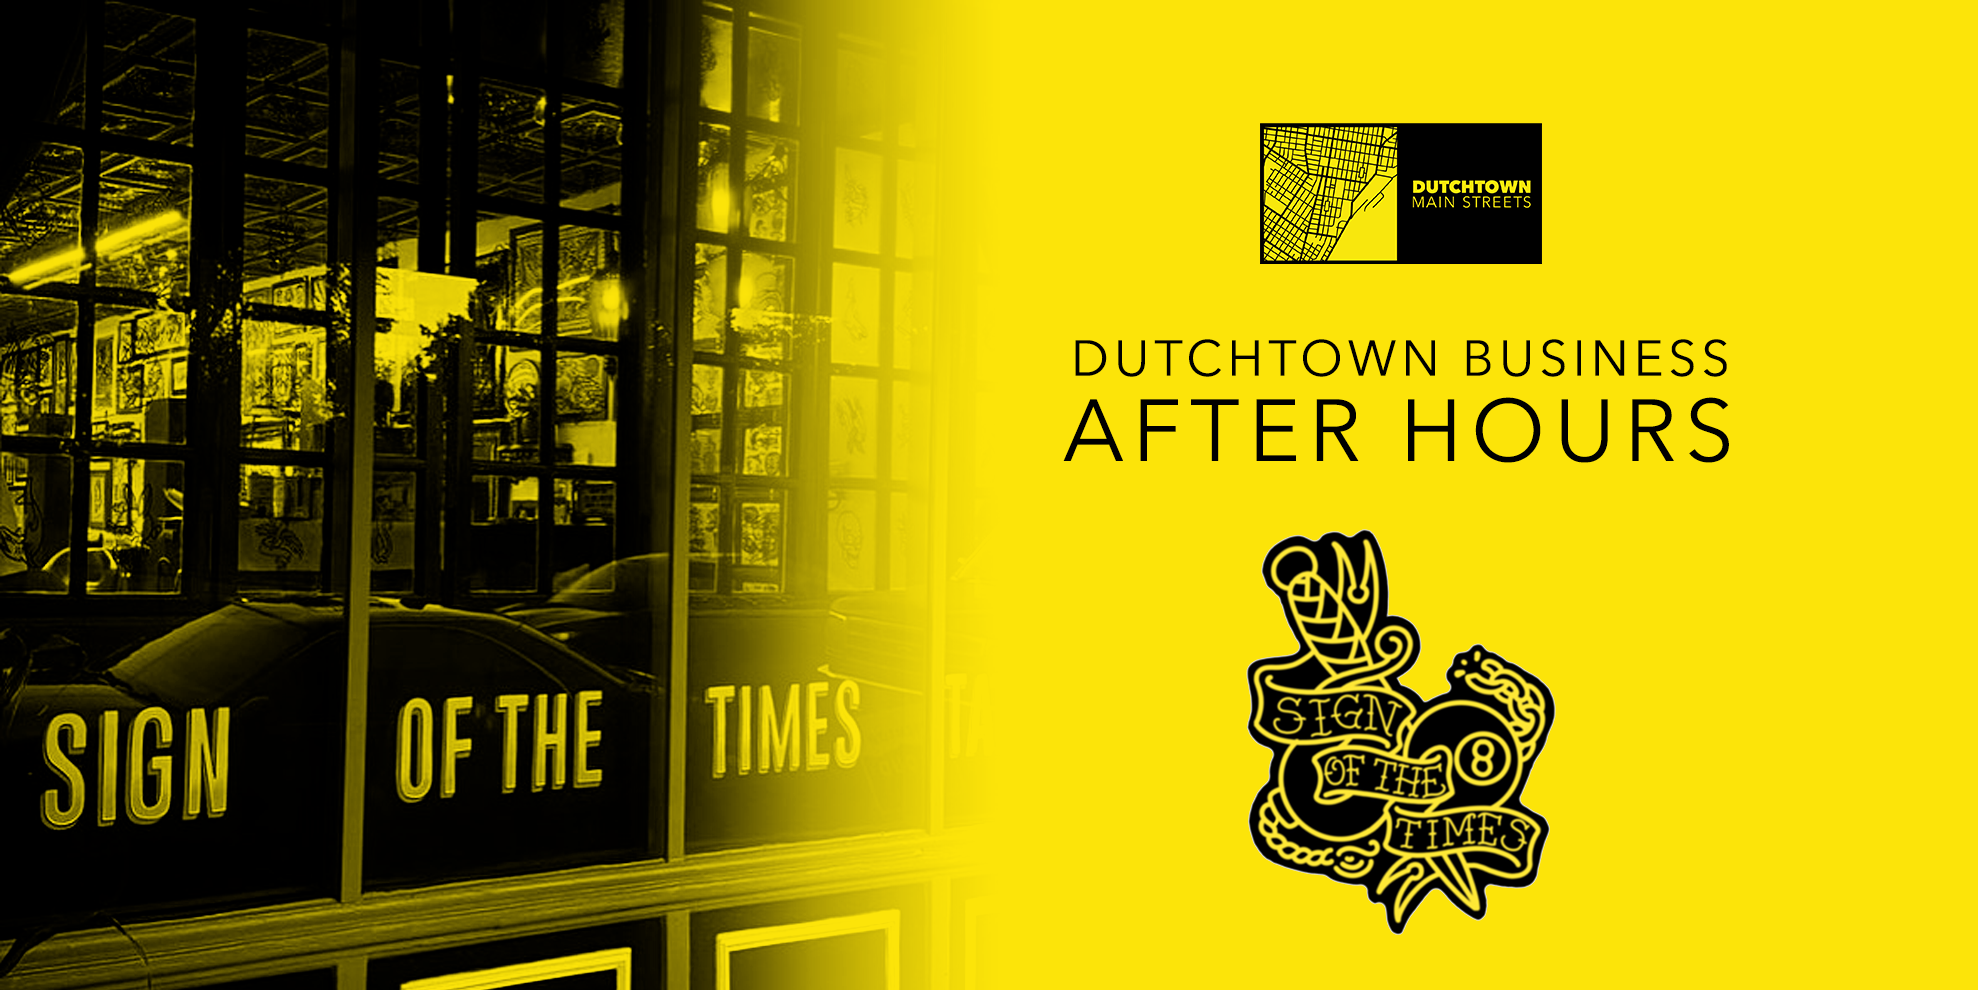 Dutchtown Business After Hours: Sign of the Times Tattoo